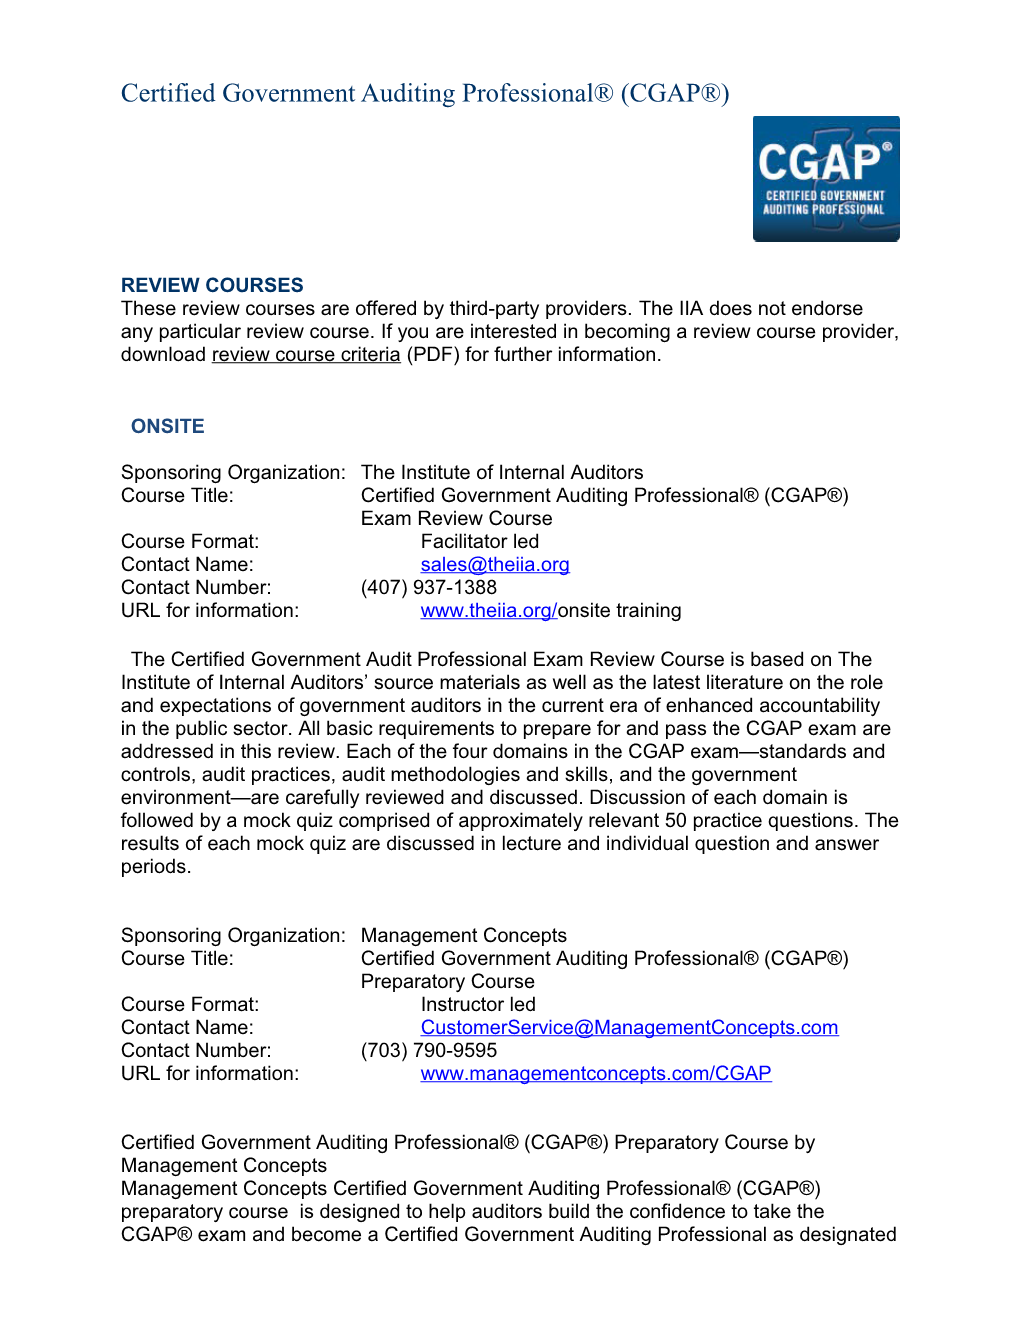 Certified Government Auditing Professional (CGAP) Exam Review Courses